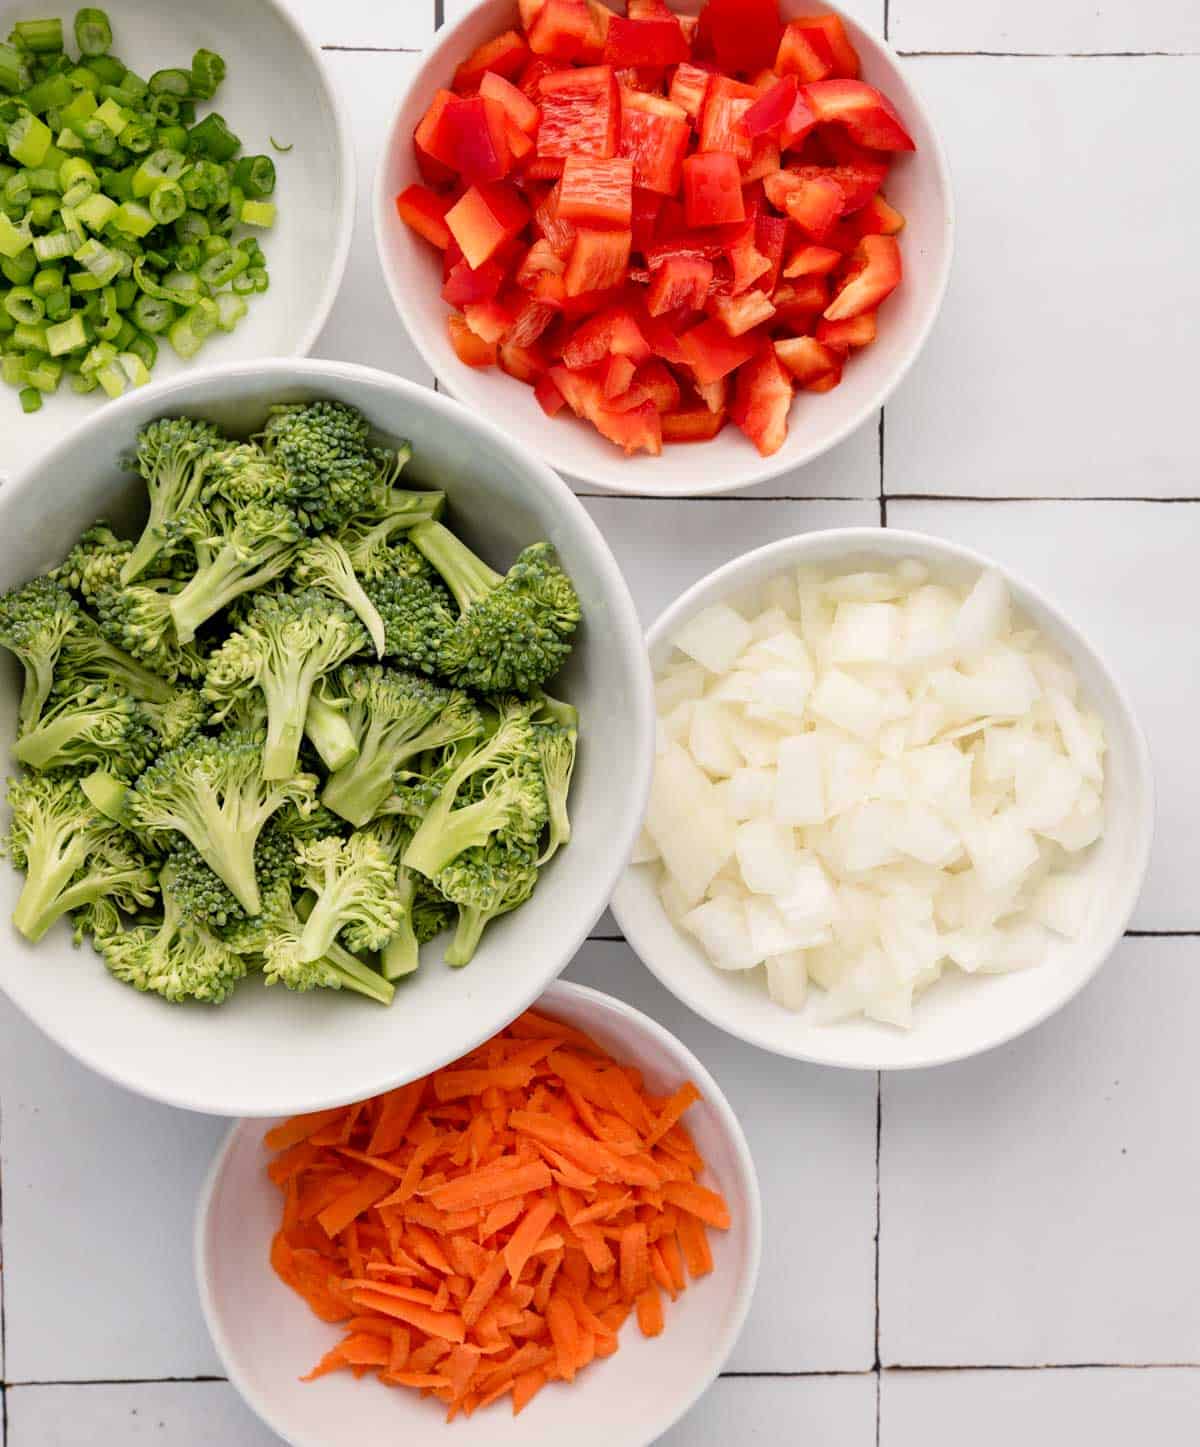 chopped vegetables (carrot, peppers, onion, green onion and broccoli) in white bowls from overhead